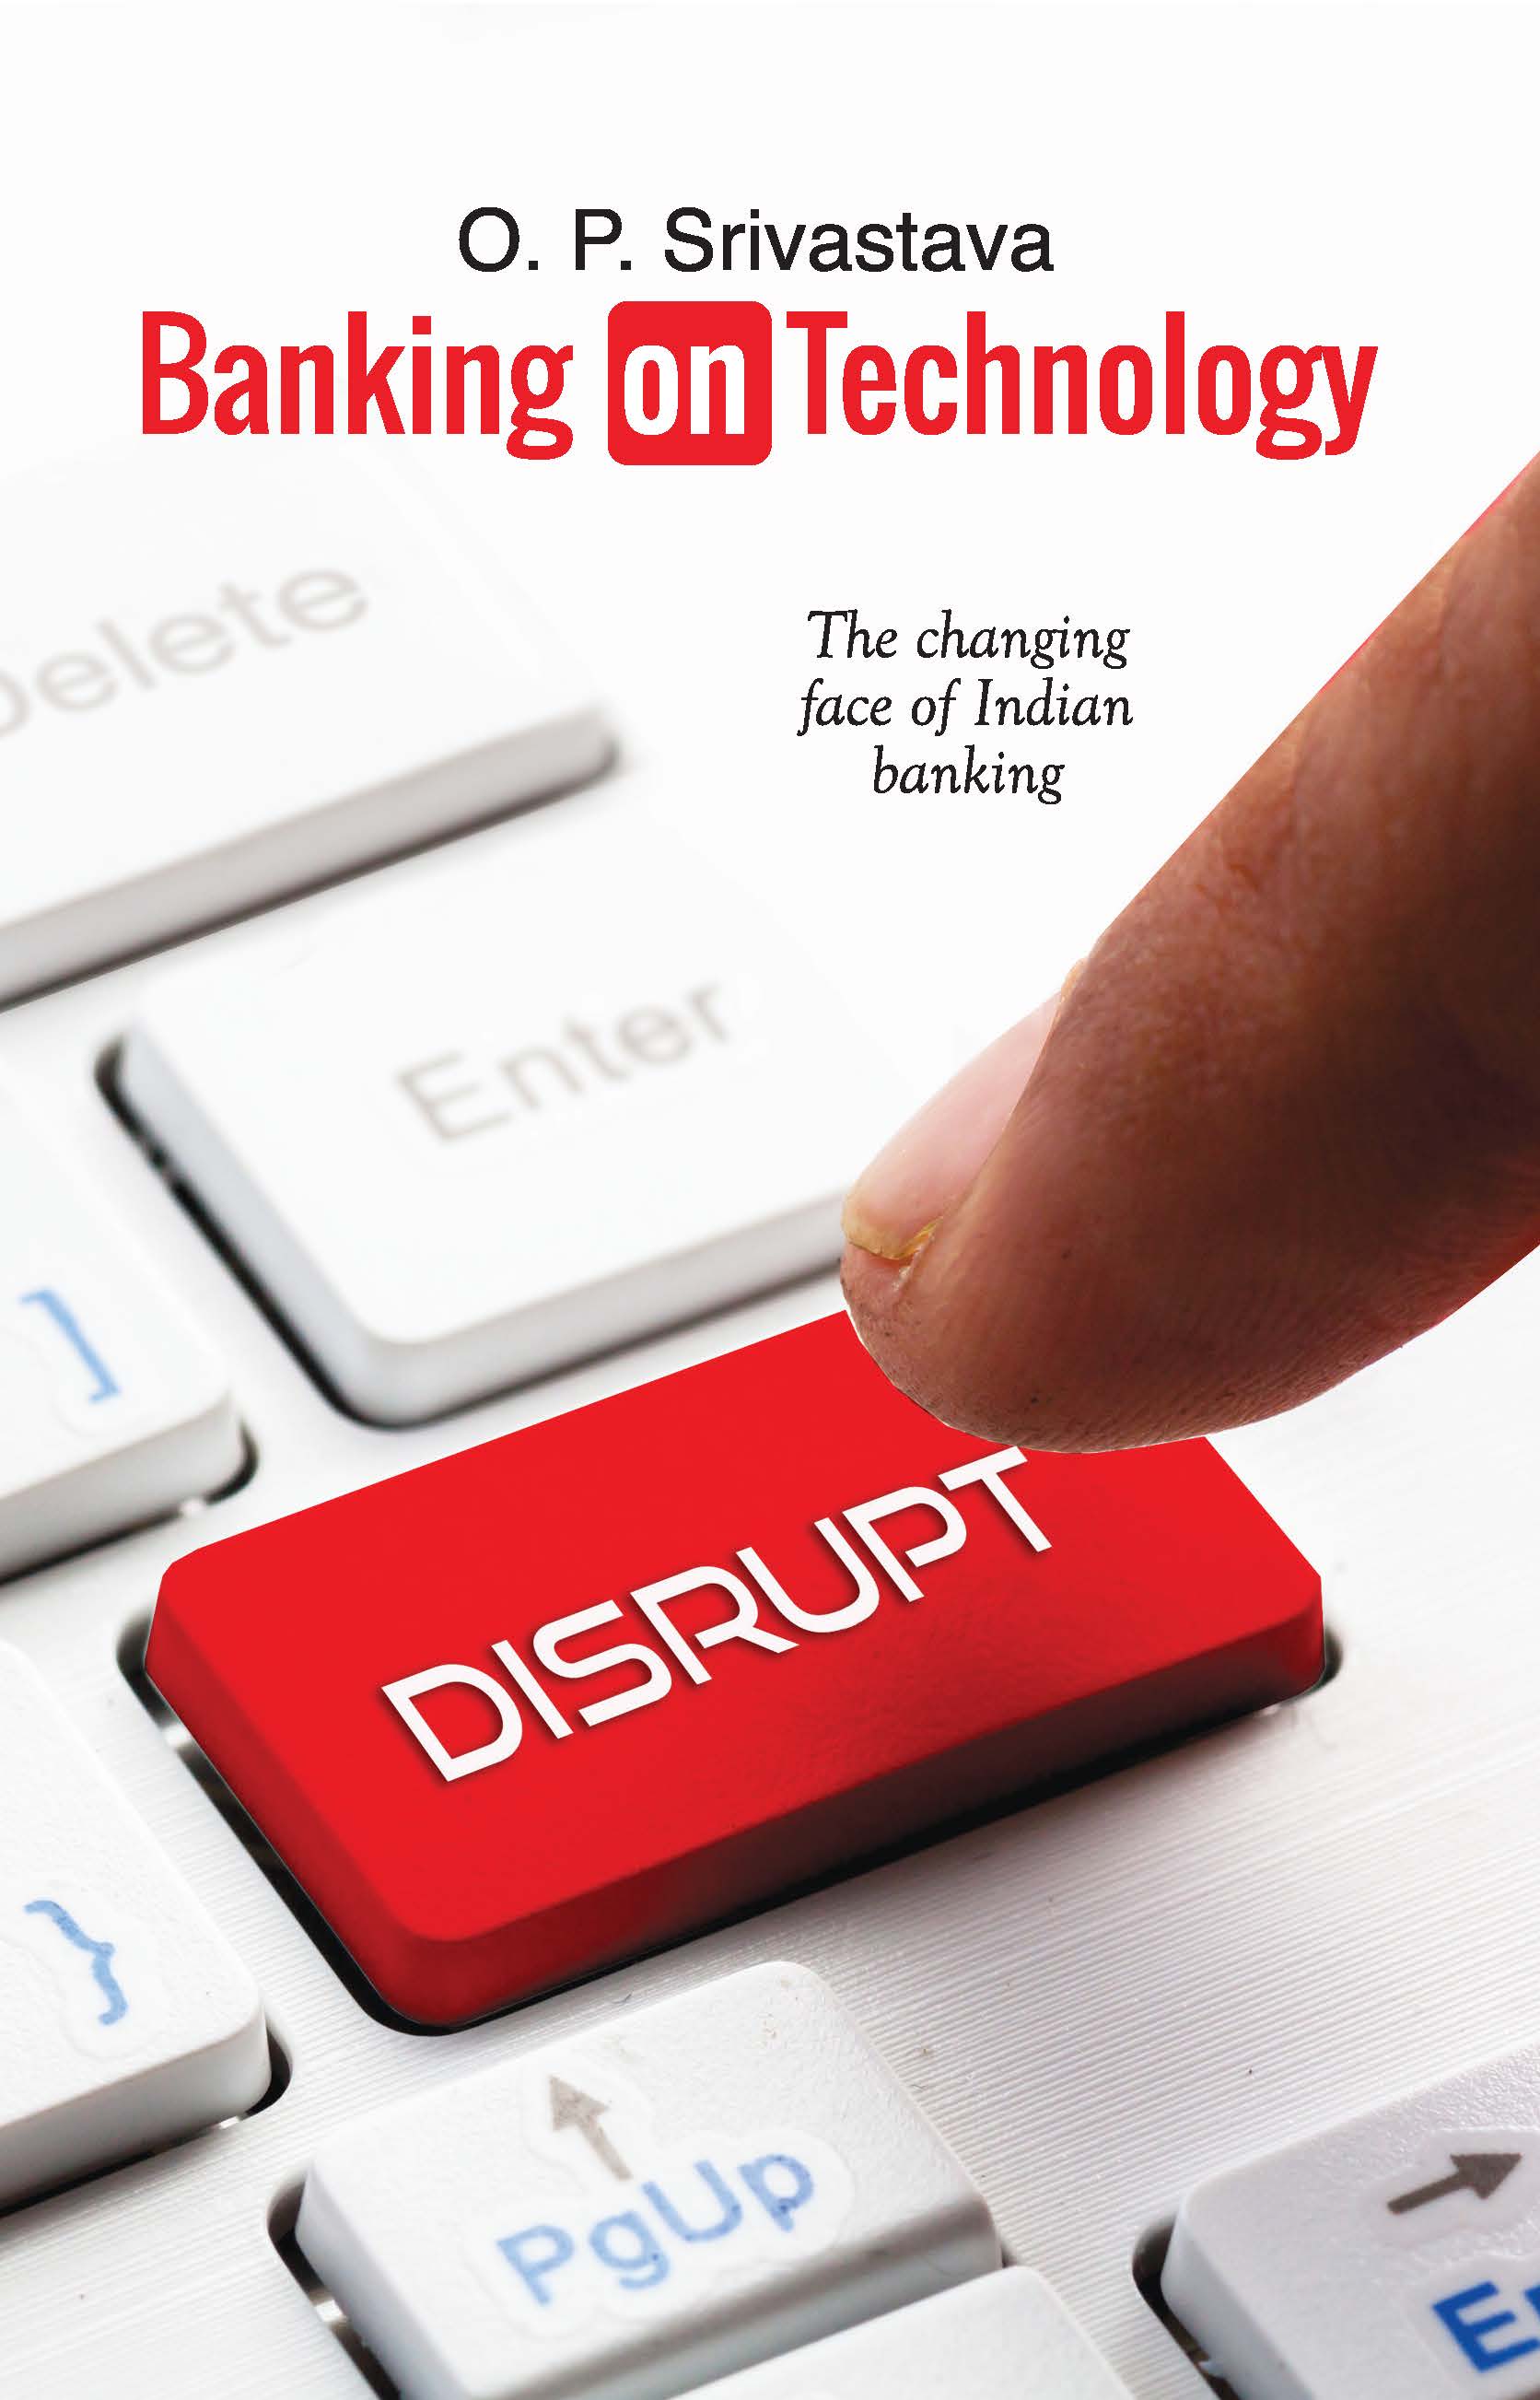 Banking on Technology: The Changing Face of Indian Banking